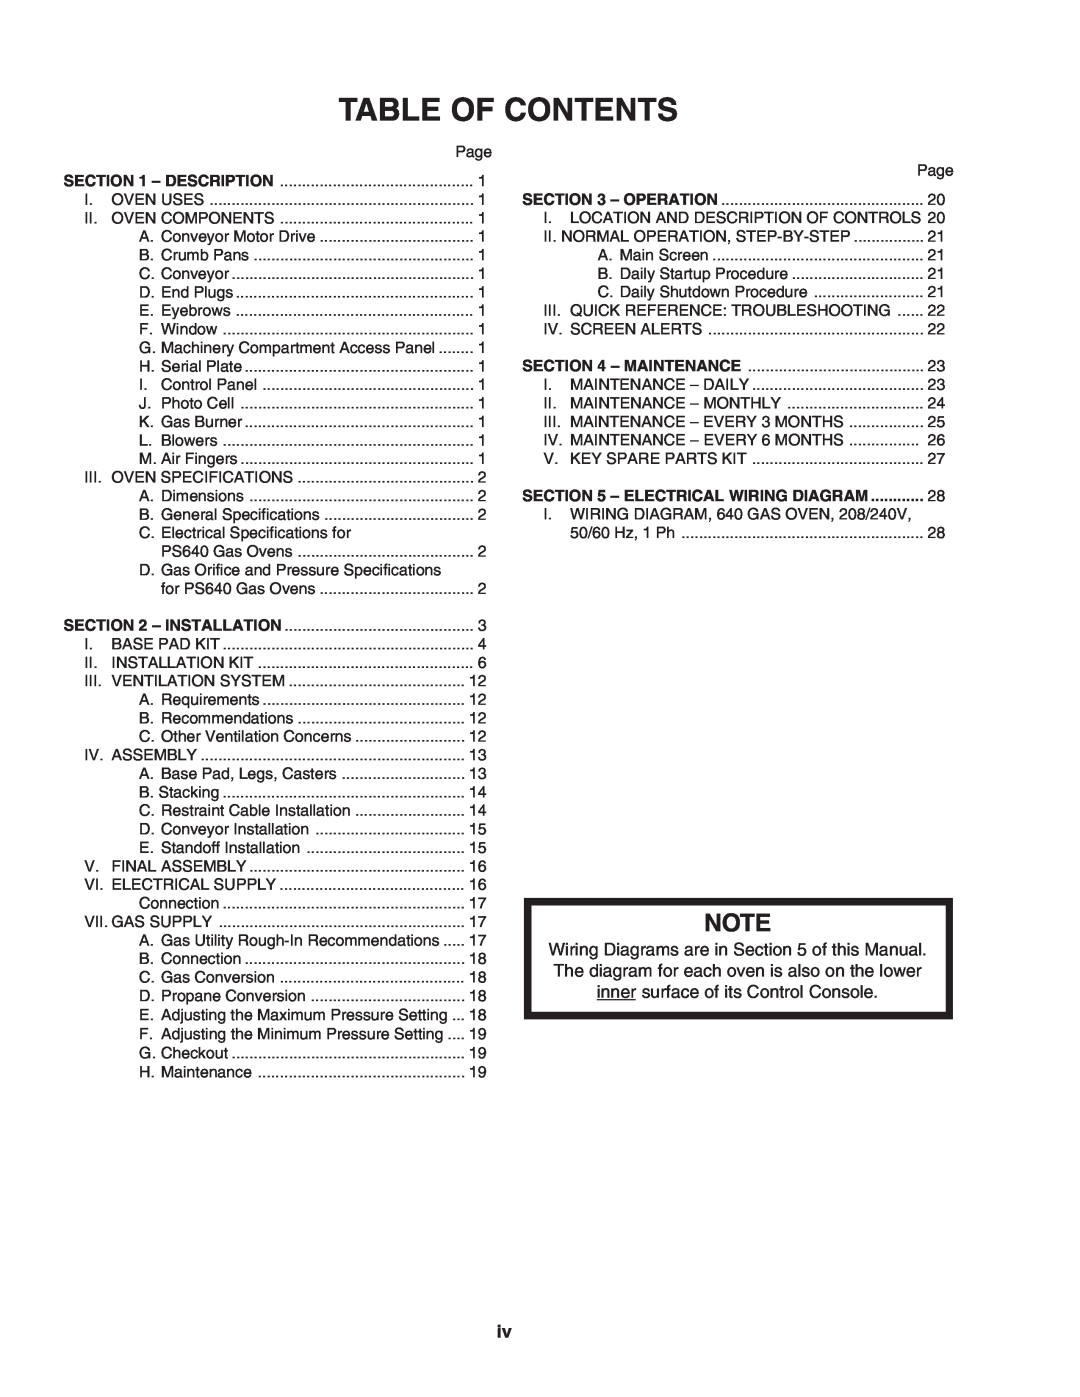 Middleby Marshall PS640 installation manual Table Of Contents, Operation, Electrical Wiring Diagram 